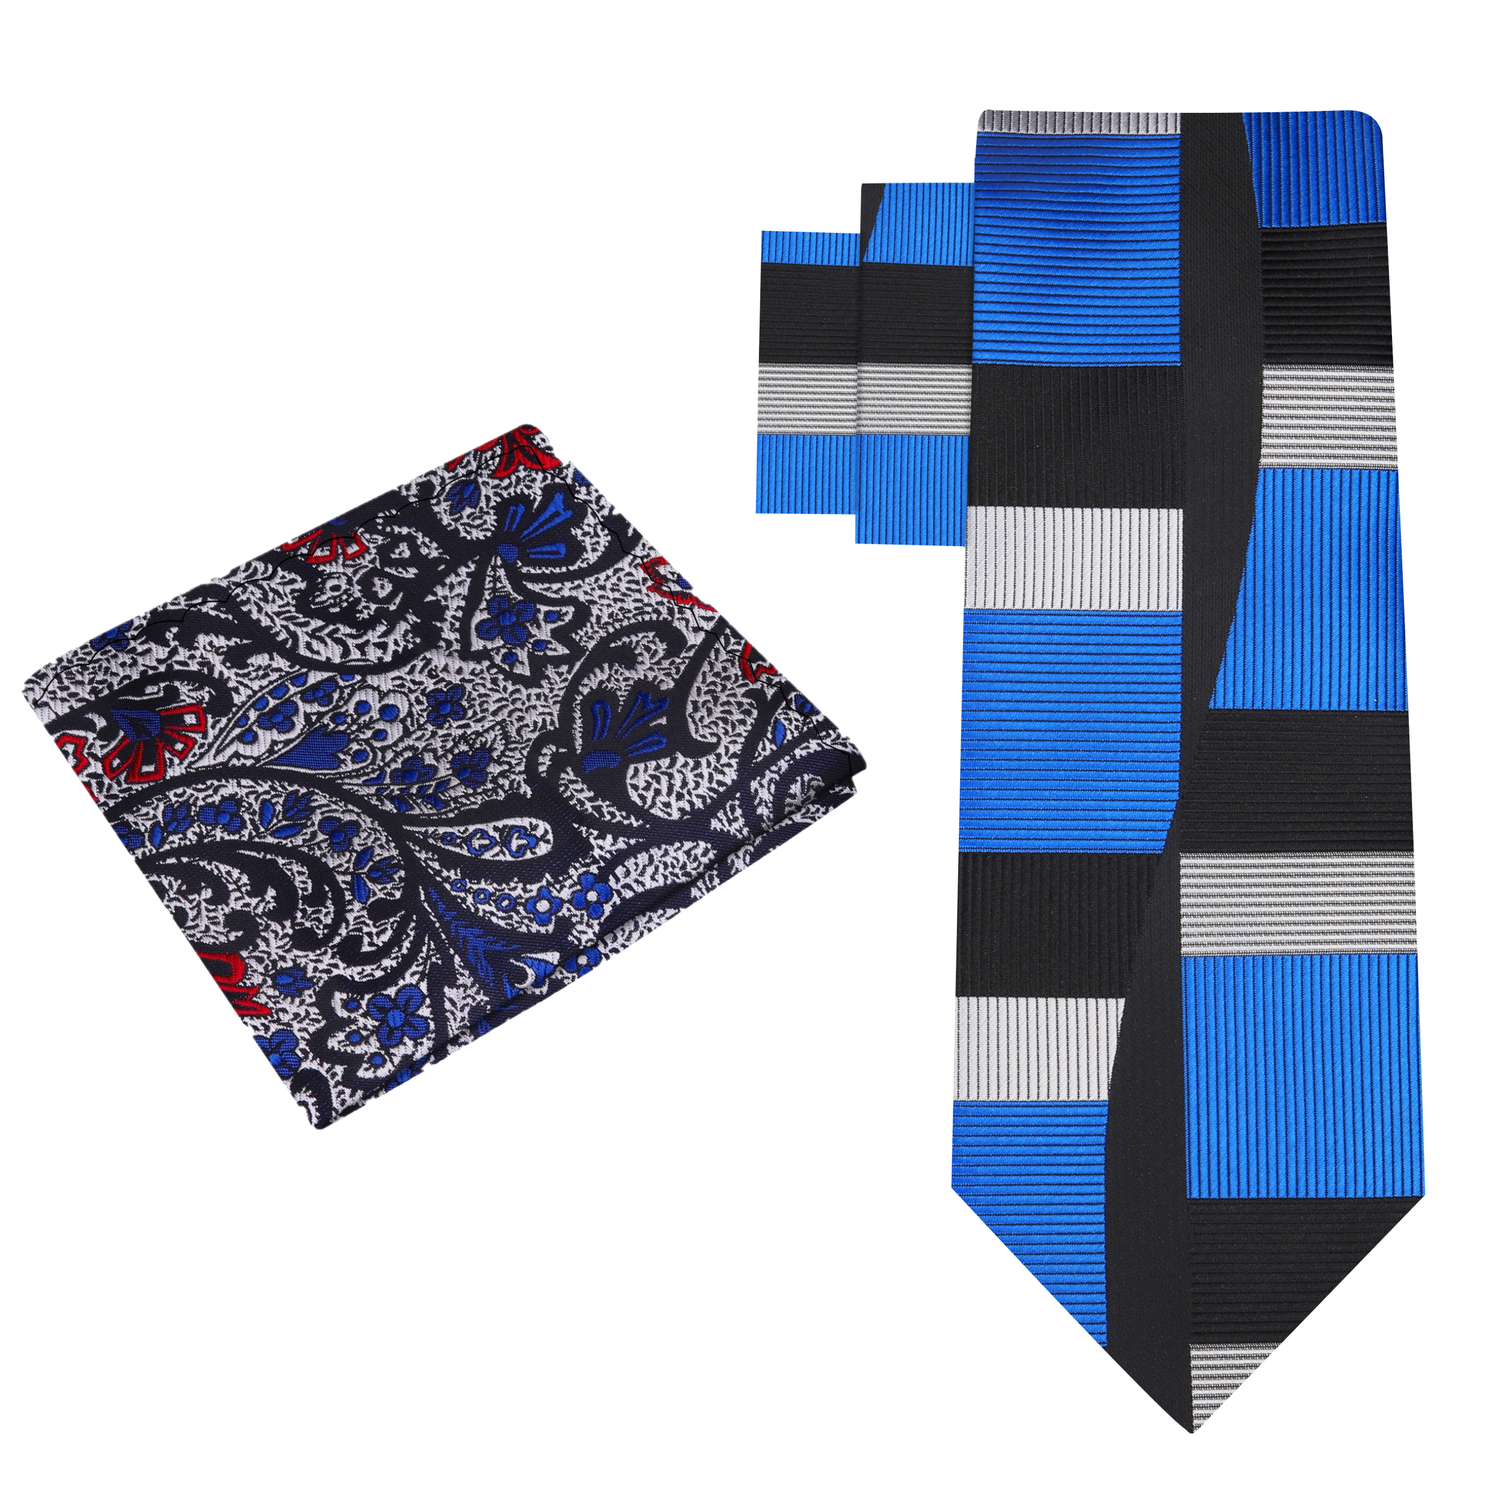 Alt View: Blue, Grey, Black Abstract Tie and Accenting Grey, Black, Red Paisley Pocket Square